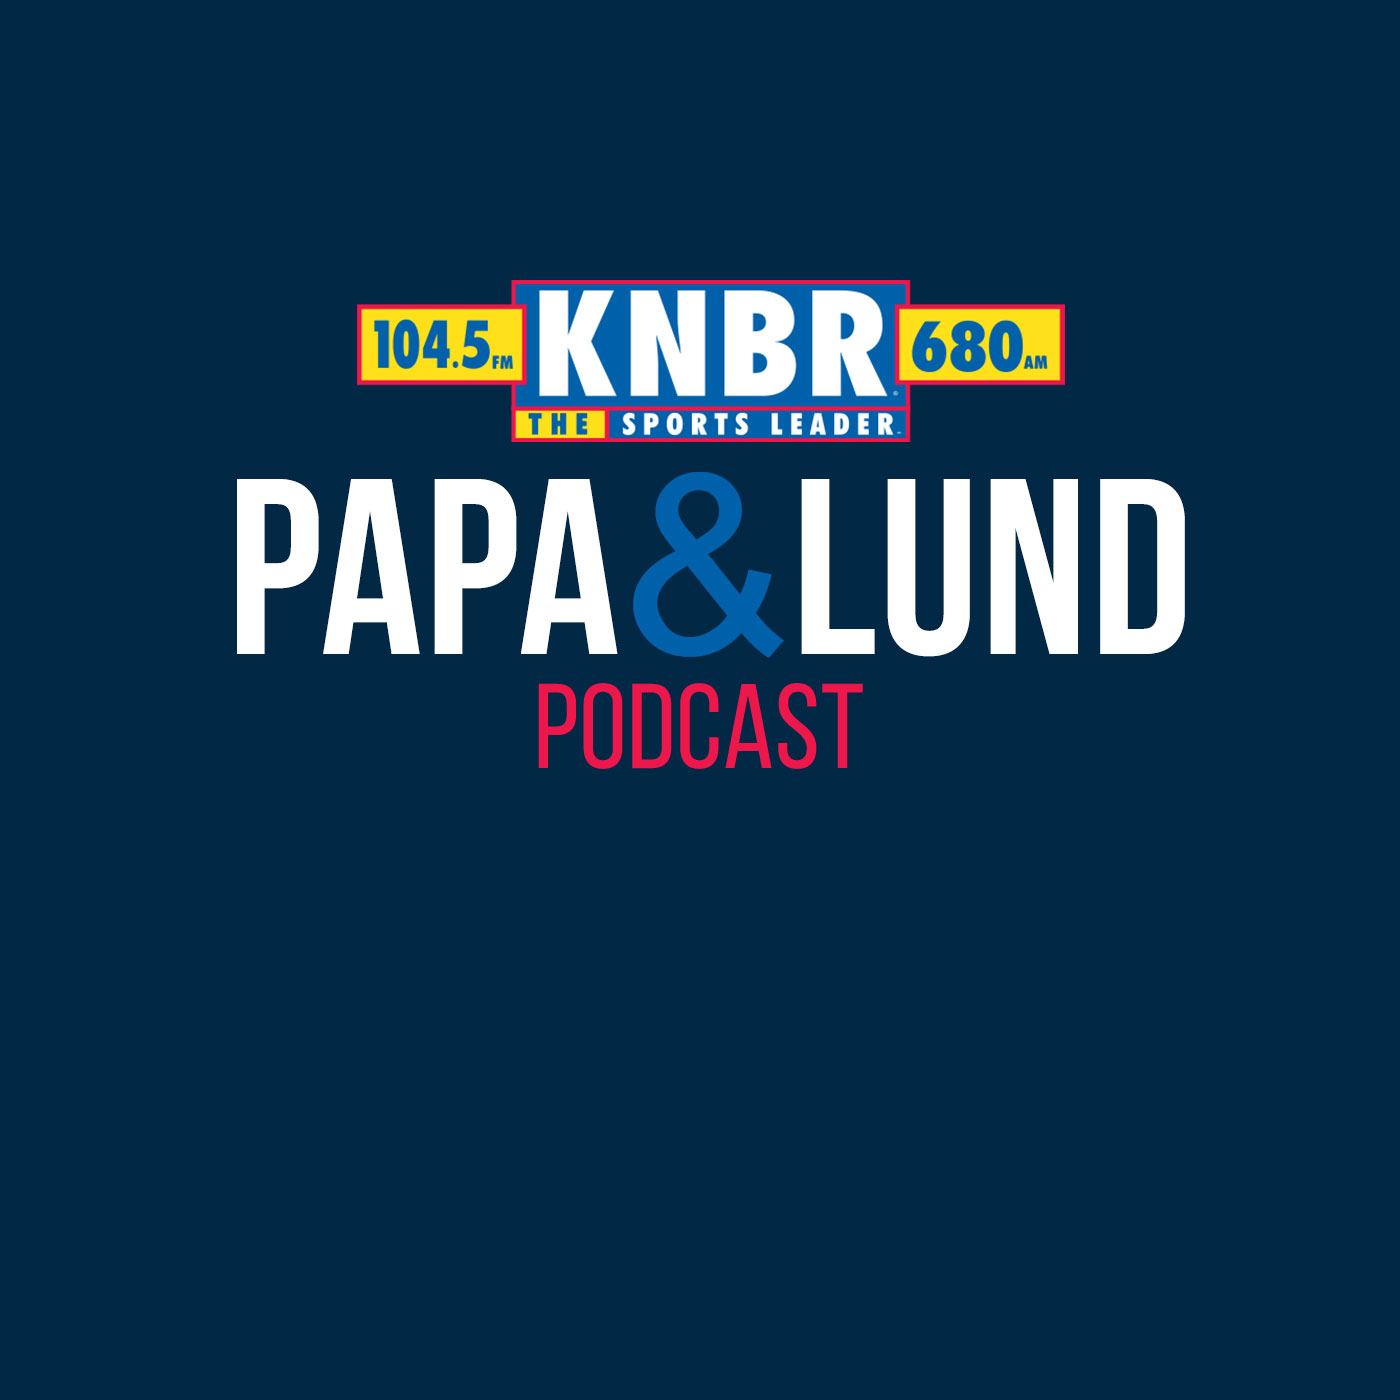 12-06 Tiki Barber joins Papa & Lund the day after calling the 49ers tough loss in Seattle